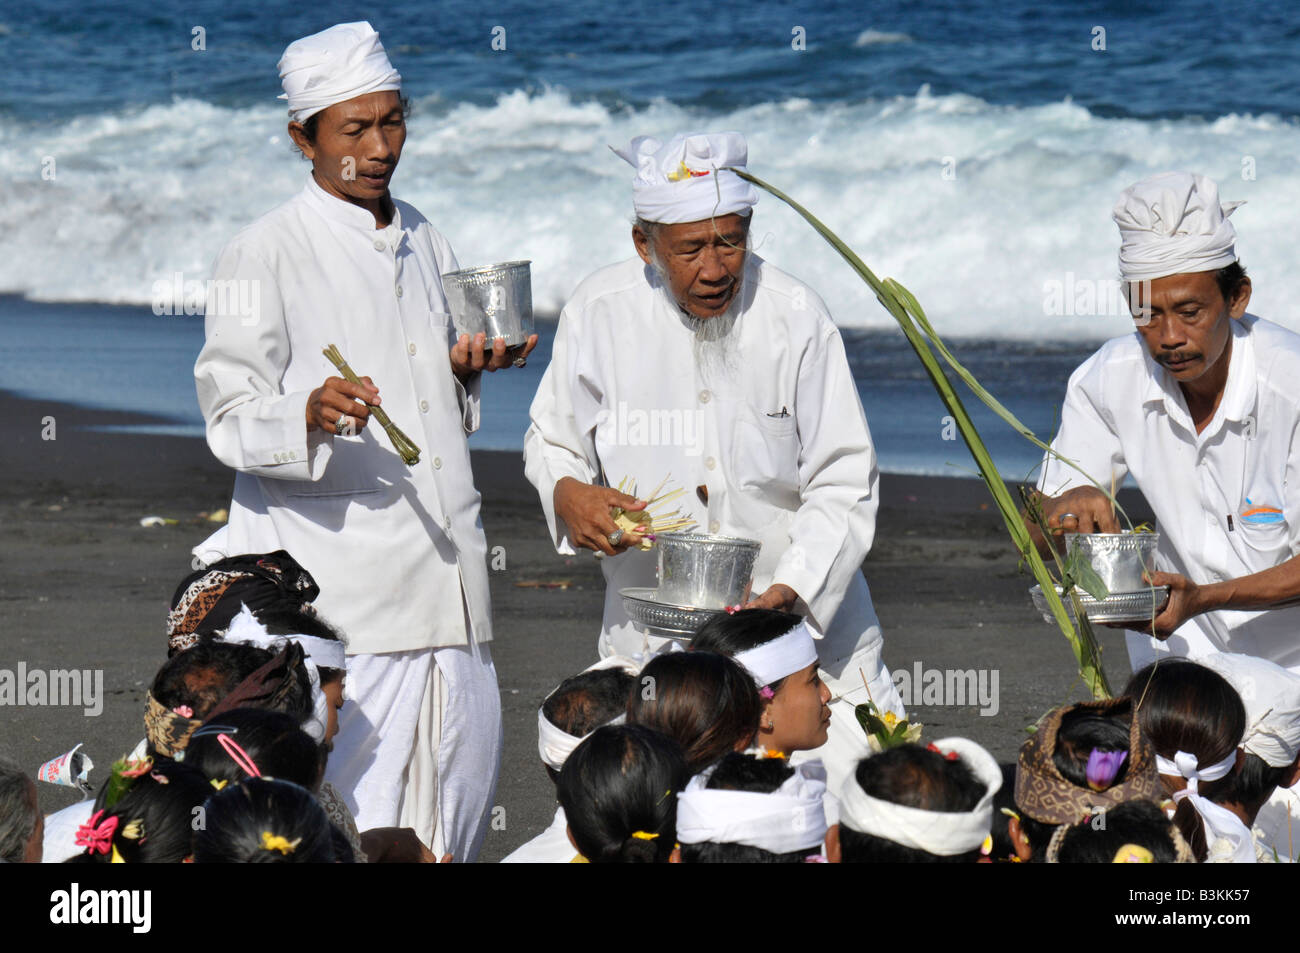 manco blessing the mourners, carrying out the final ritual in the cycle of life and death, bali hindu belief , kusamba , bali Stock Photo